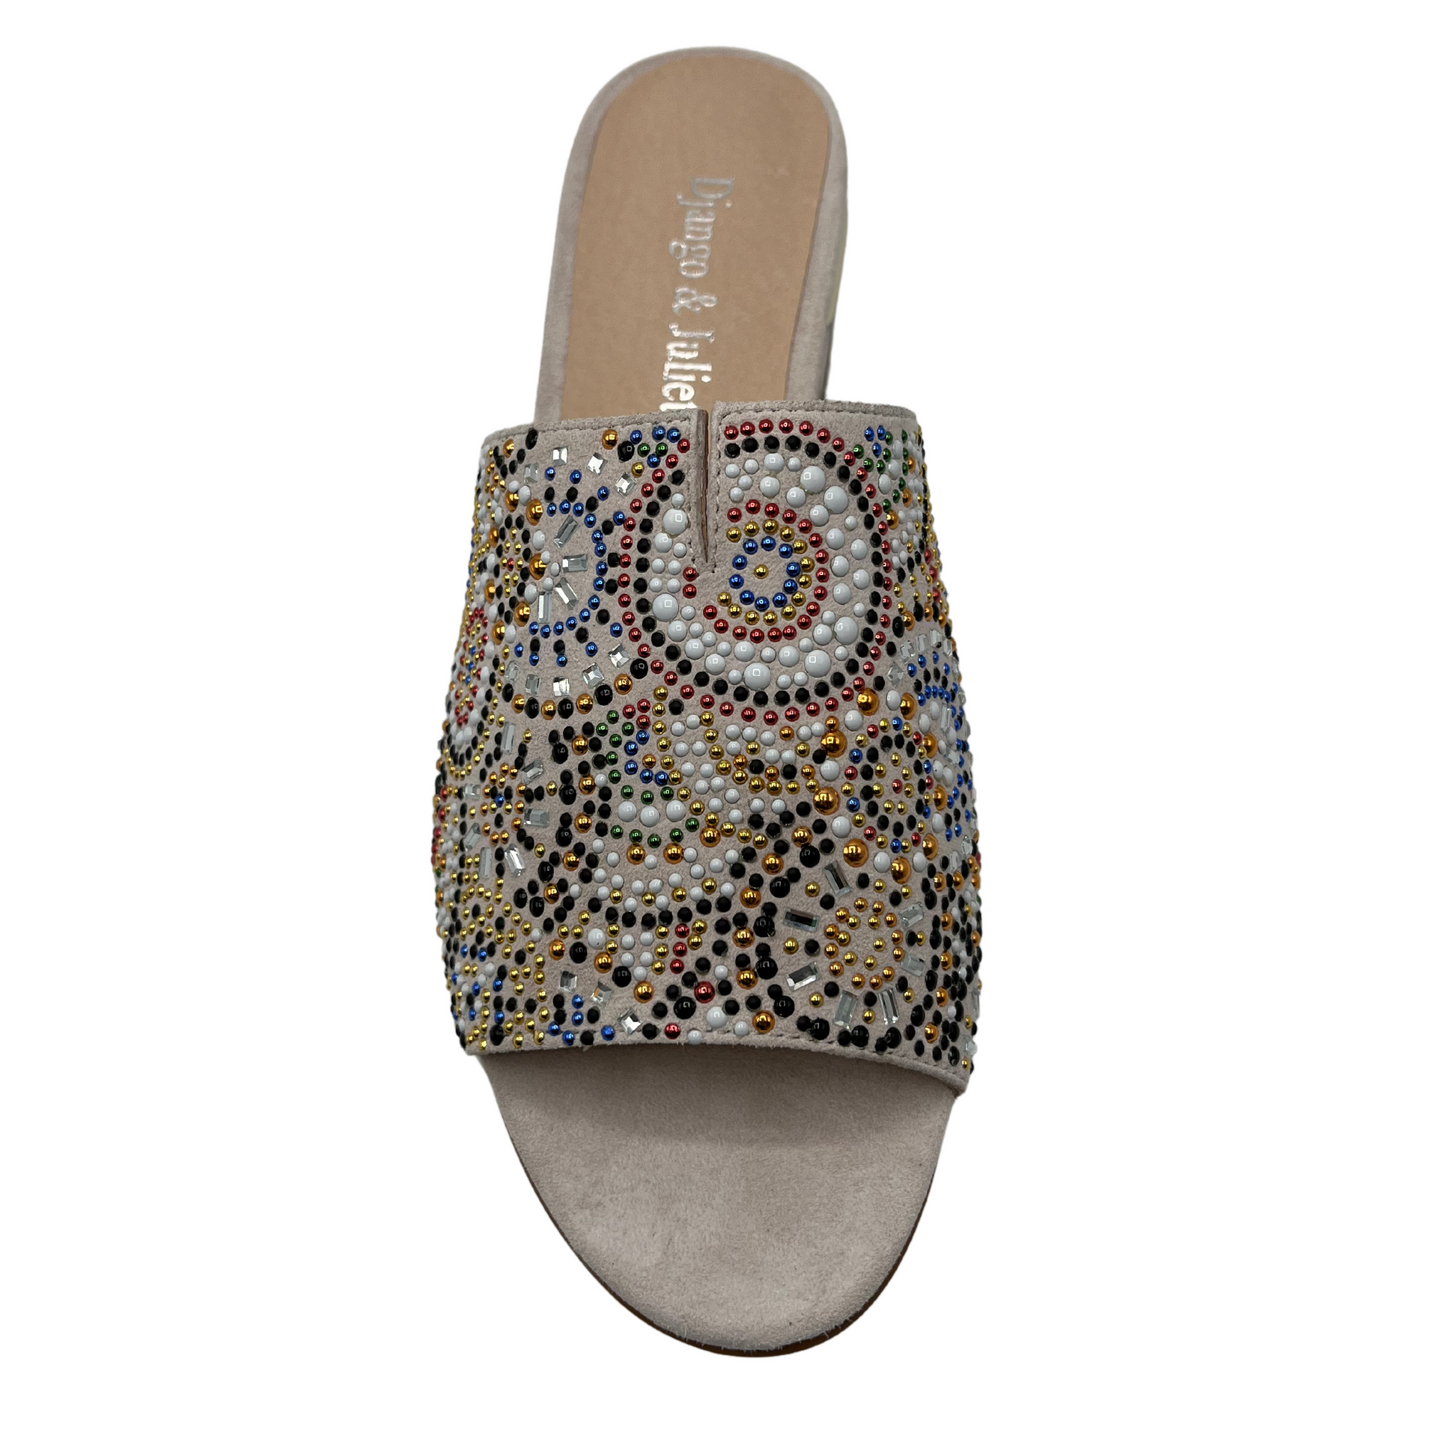 Top view of nude mule sandal with beaded detail on upper